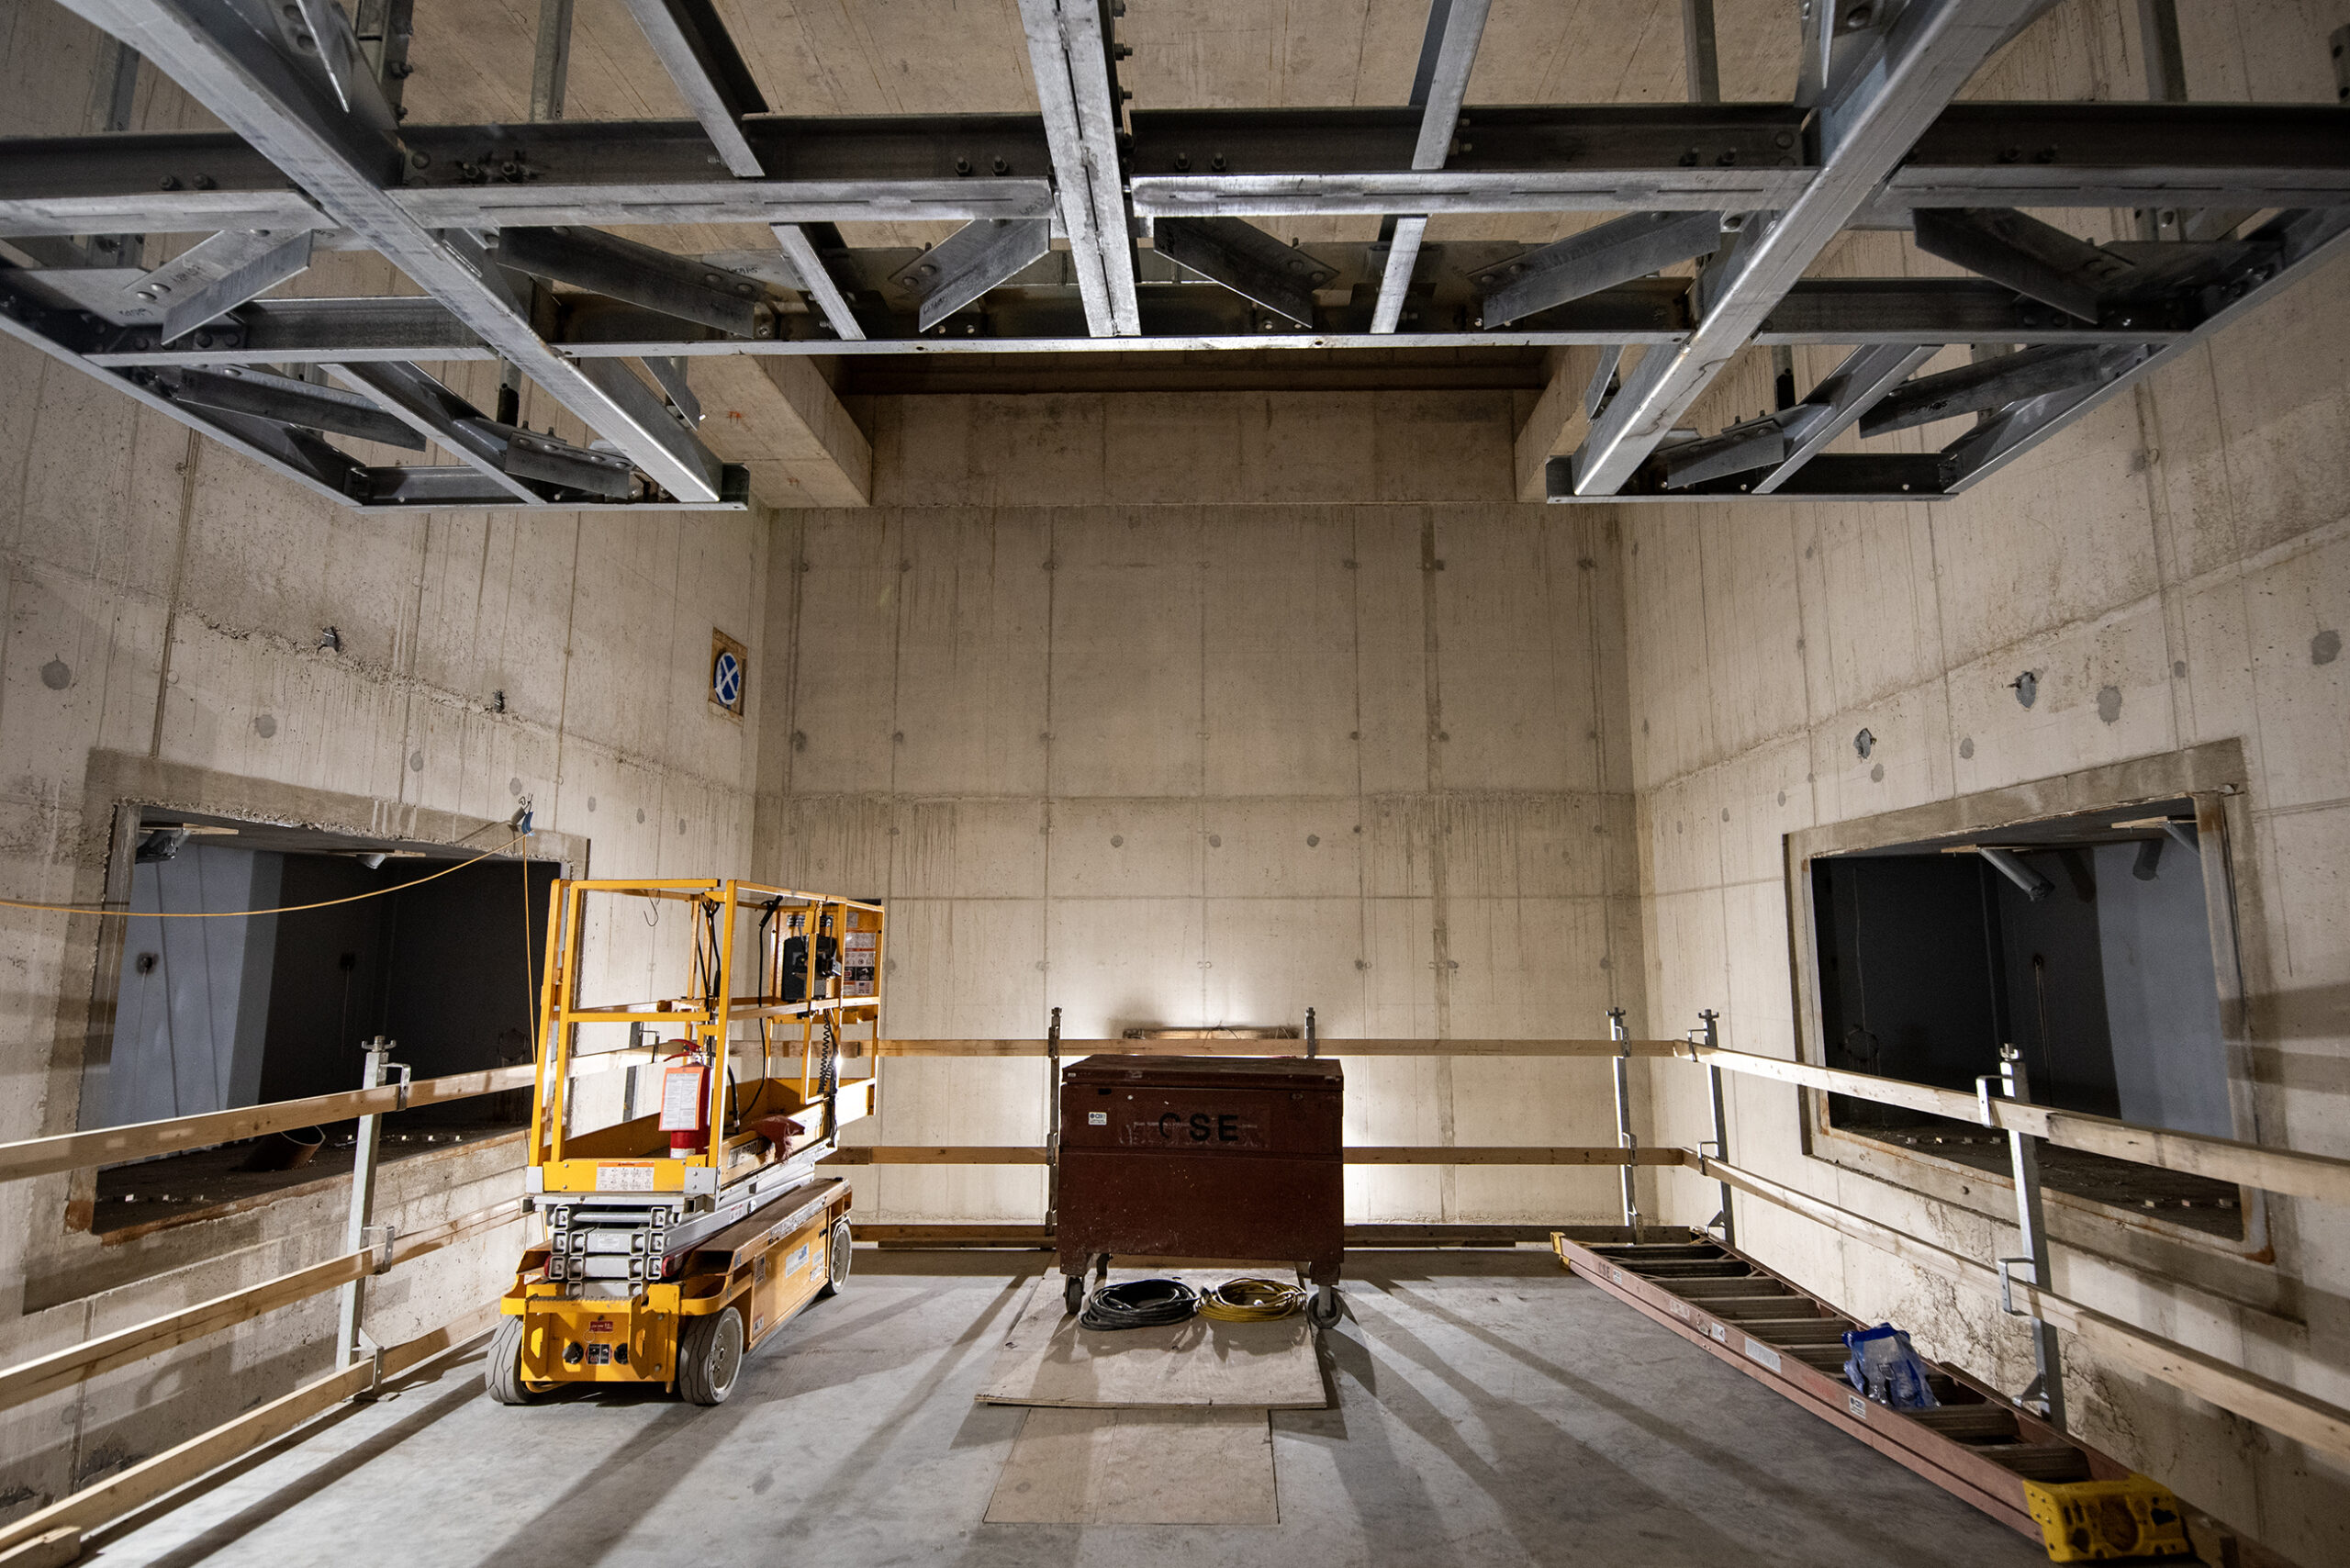 Concrete walls with rectangular spaces in the side for scanning equipment is under construction.